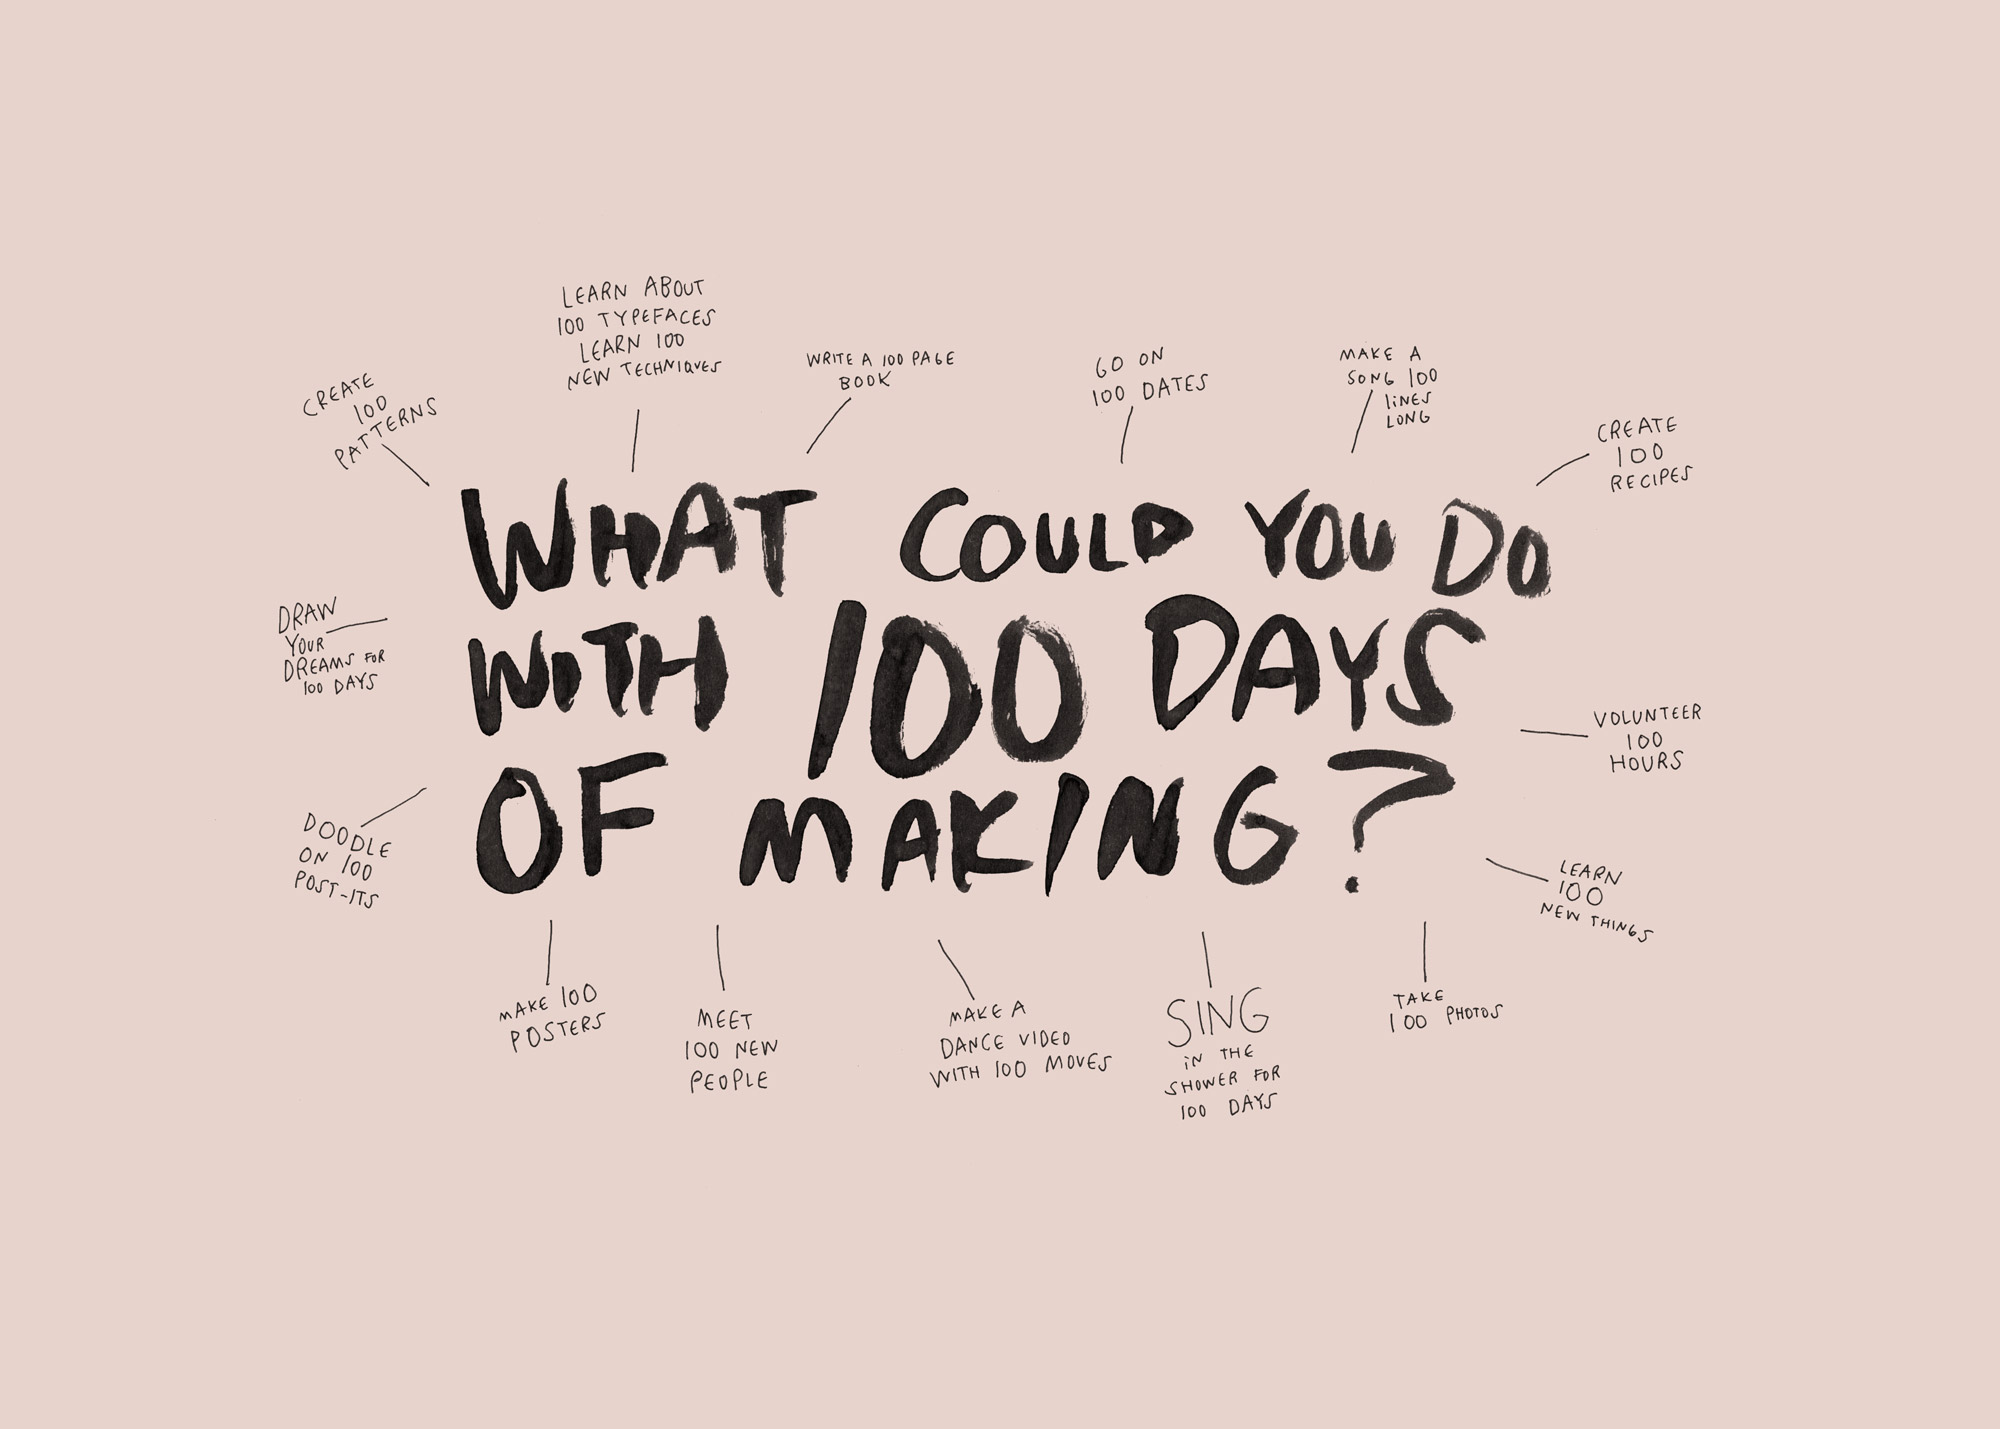 What could you do with 100 days of making?